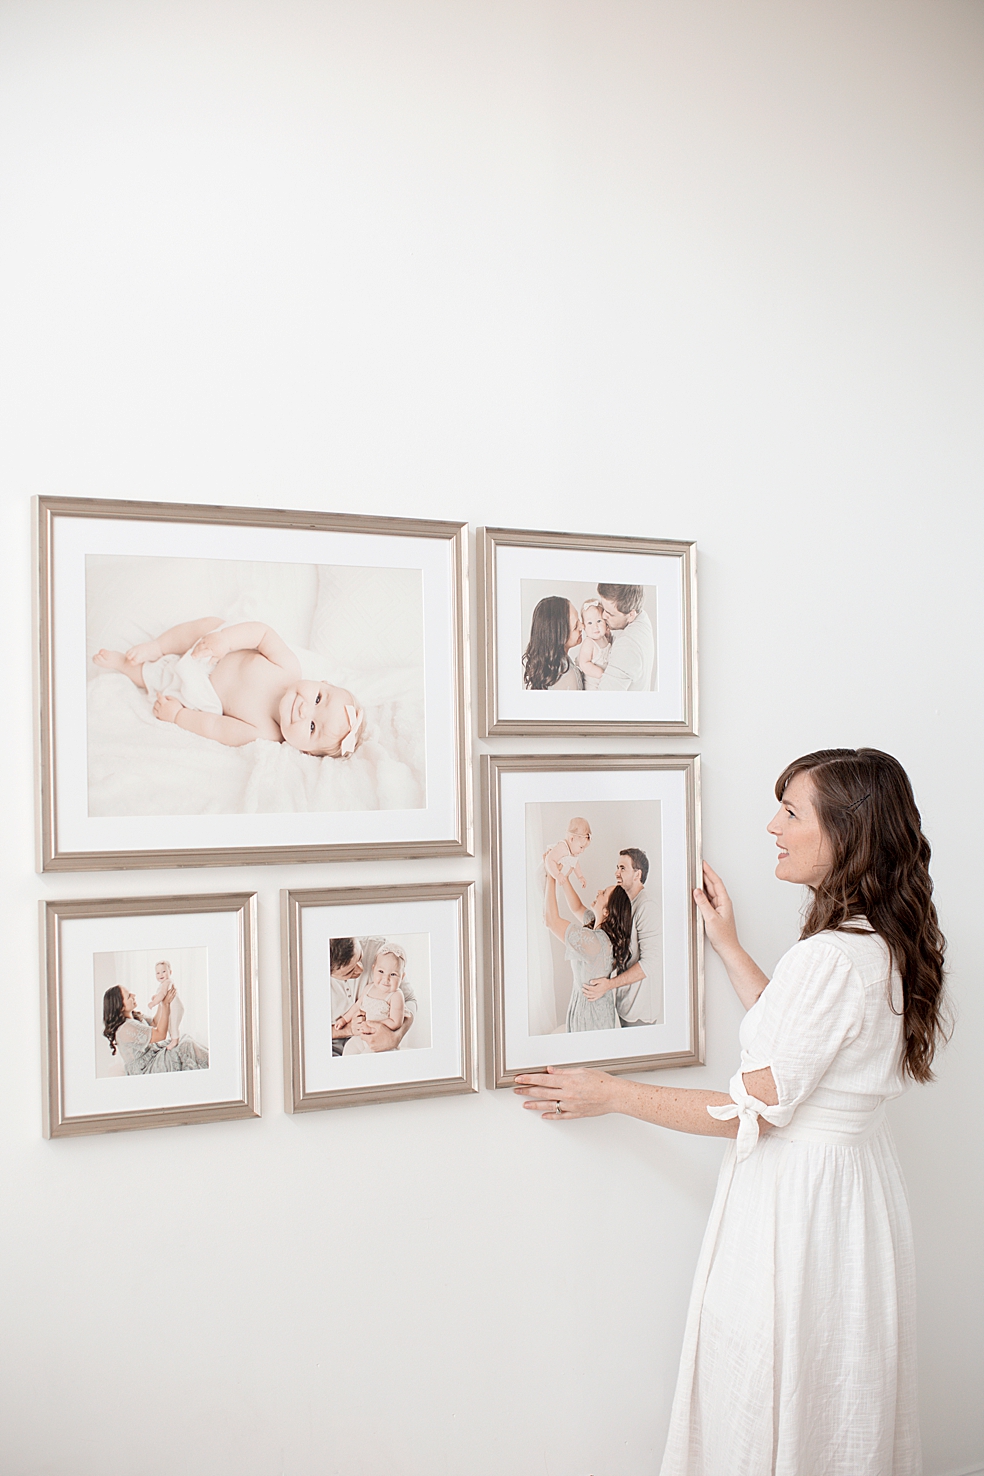 Woman hanging a gallery wall | Madison Alabama Full Service Photographer Jessica Lee 